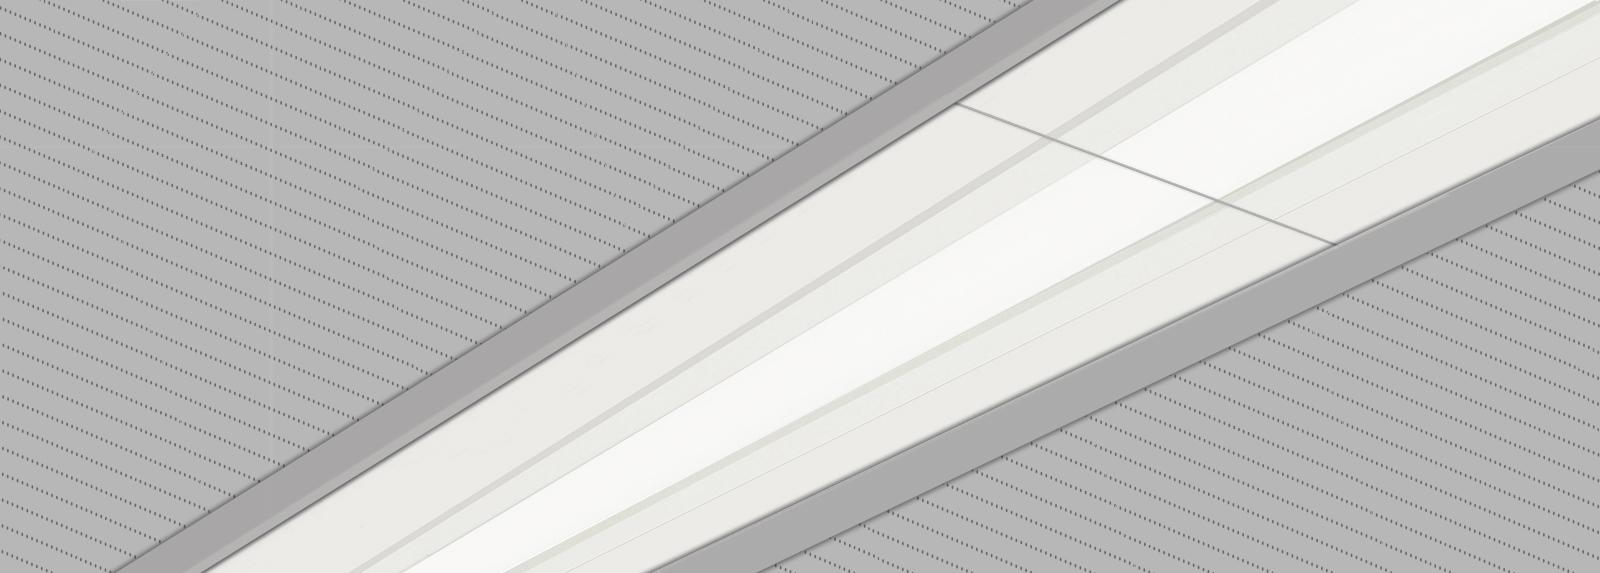 ESOR 100 | Recessed linear downlights for lighting replacement